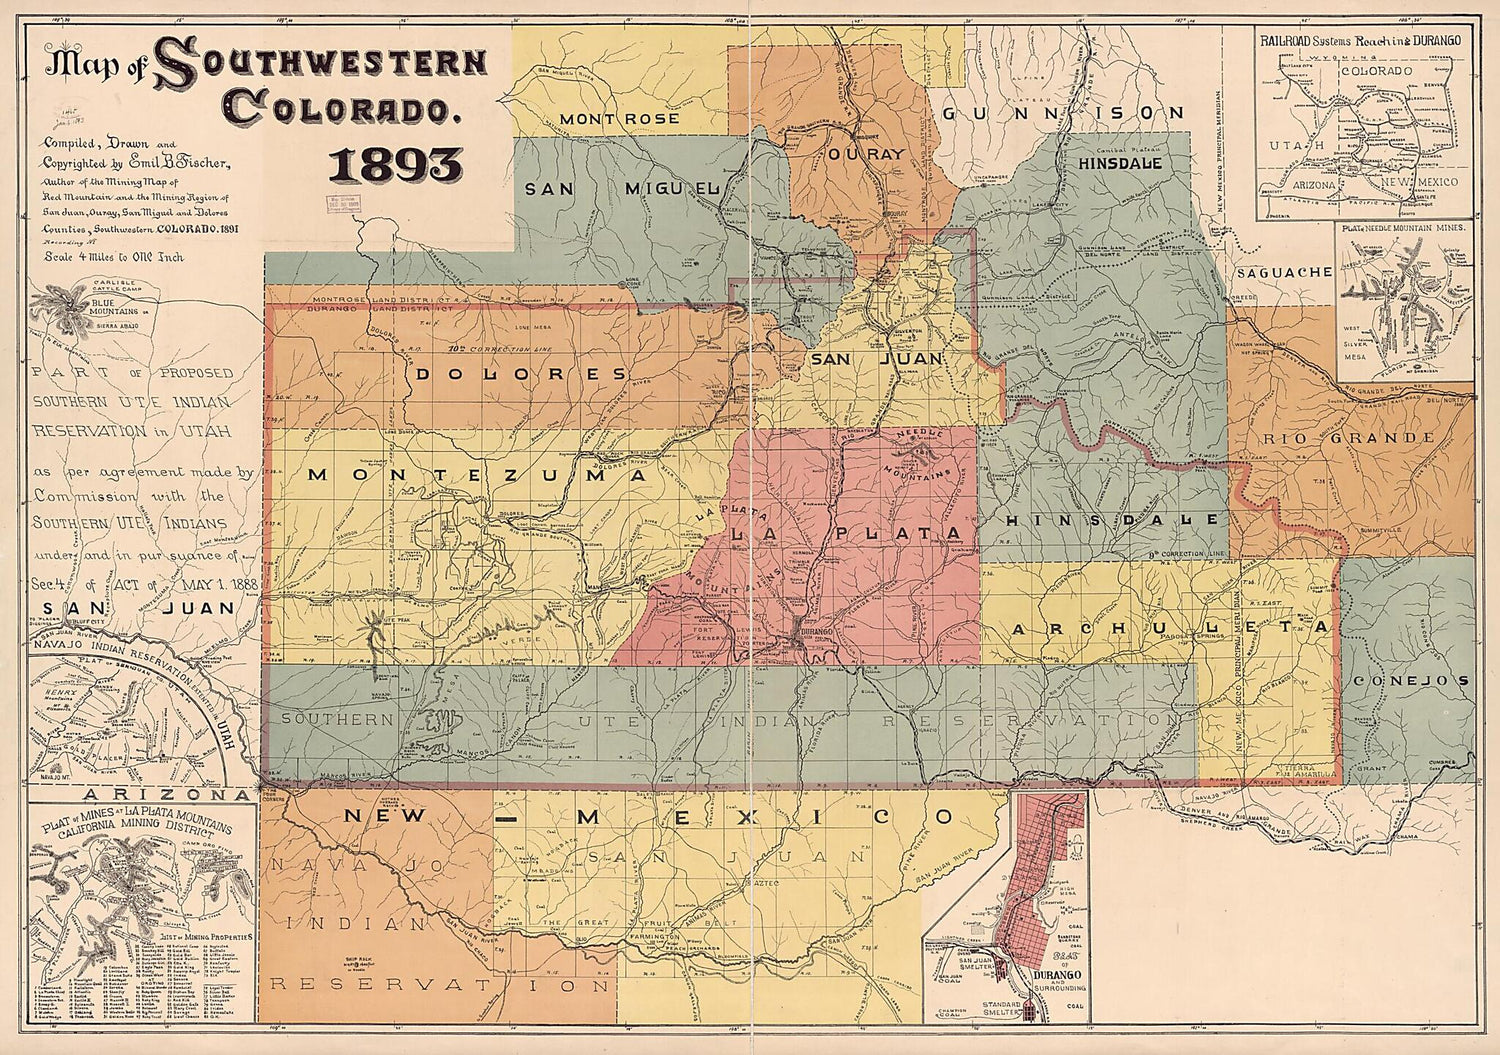 This old map of Map of Southwestern Colorado from 1893 was created by Emil B. Fischer in 1893